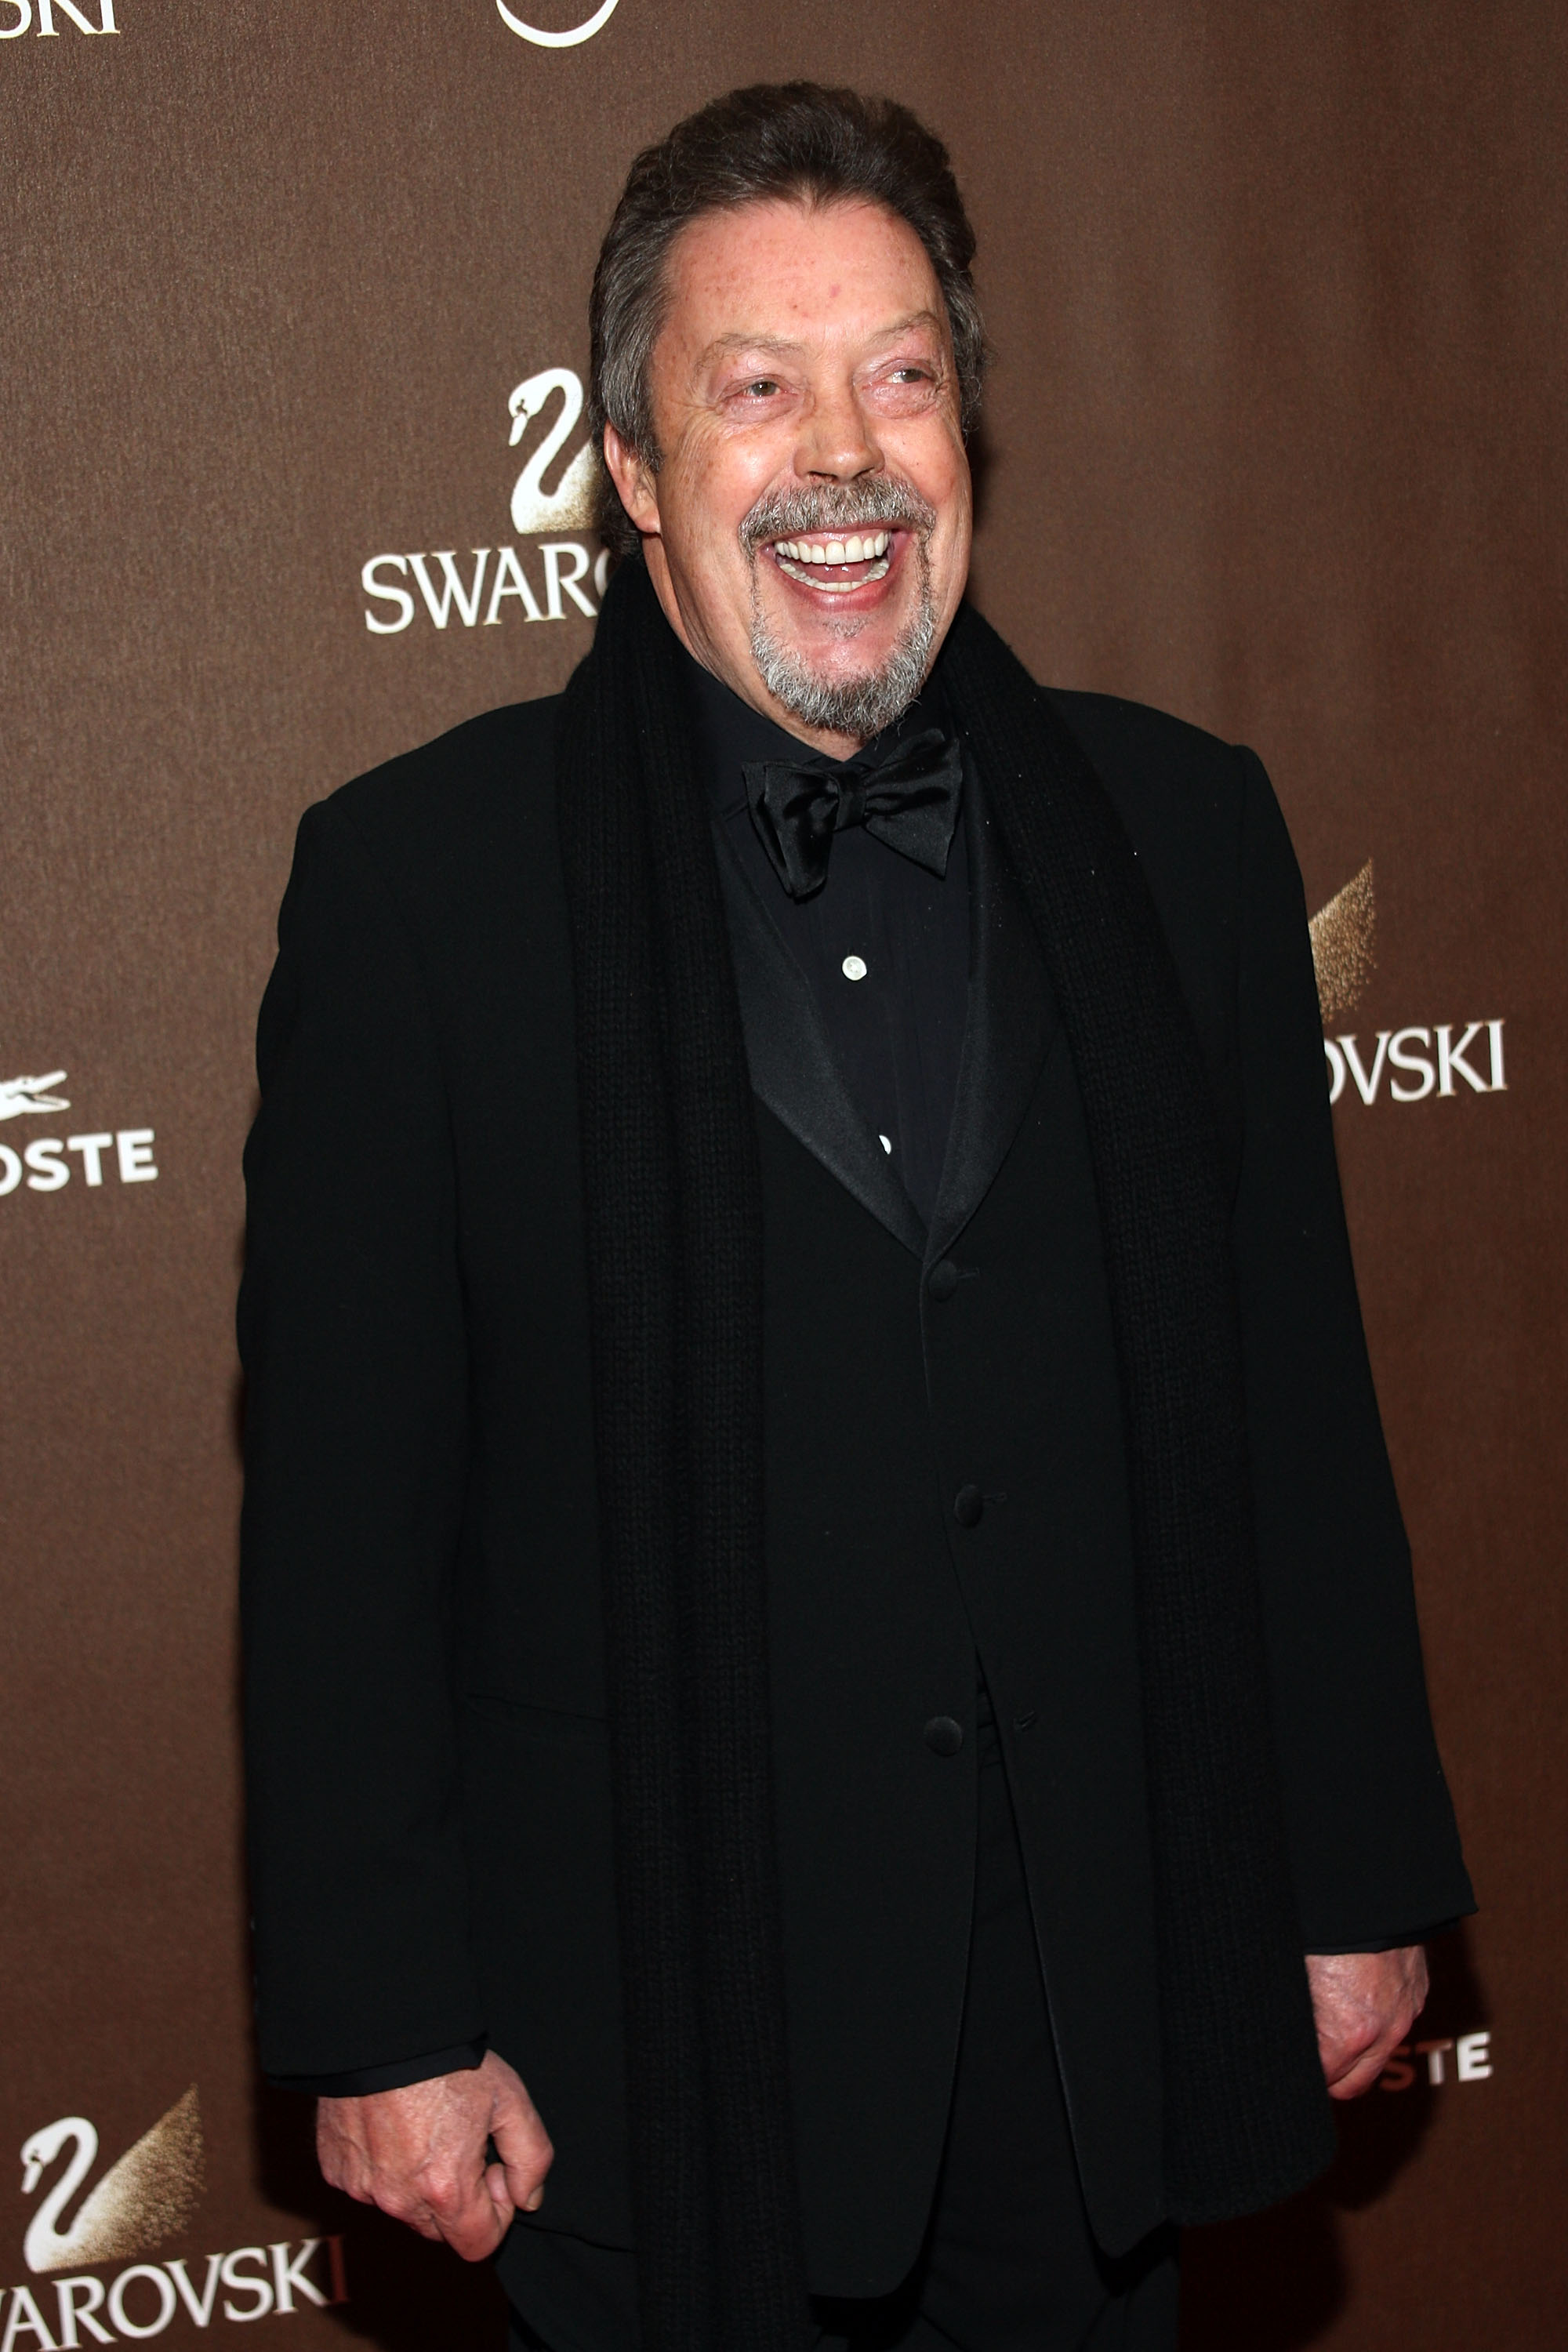 Actor Tim Curry arrives at the 10th Annual Costume Designers Guild Awards held at the Beverly Wilshire Hotel on February 19, 2008 in Beverly Hills, California | Source: Getty Images